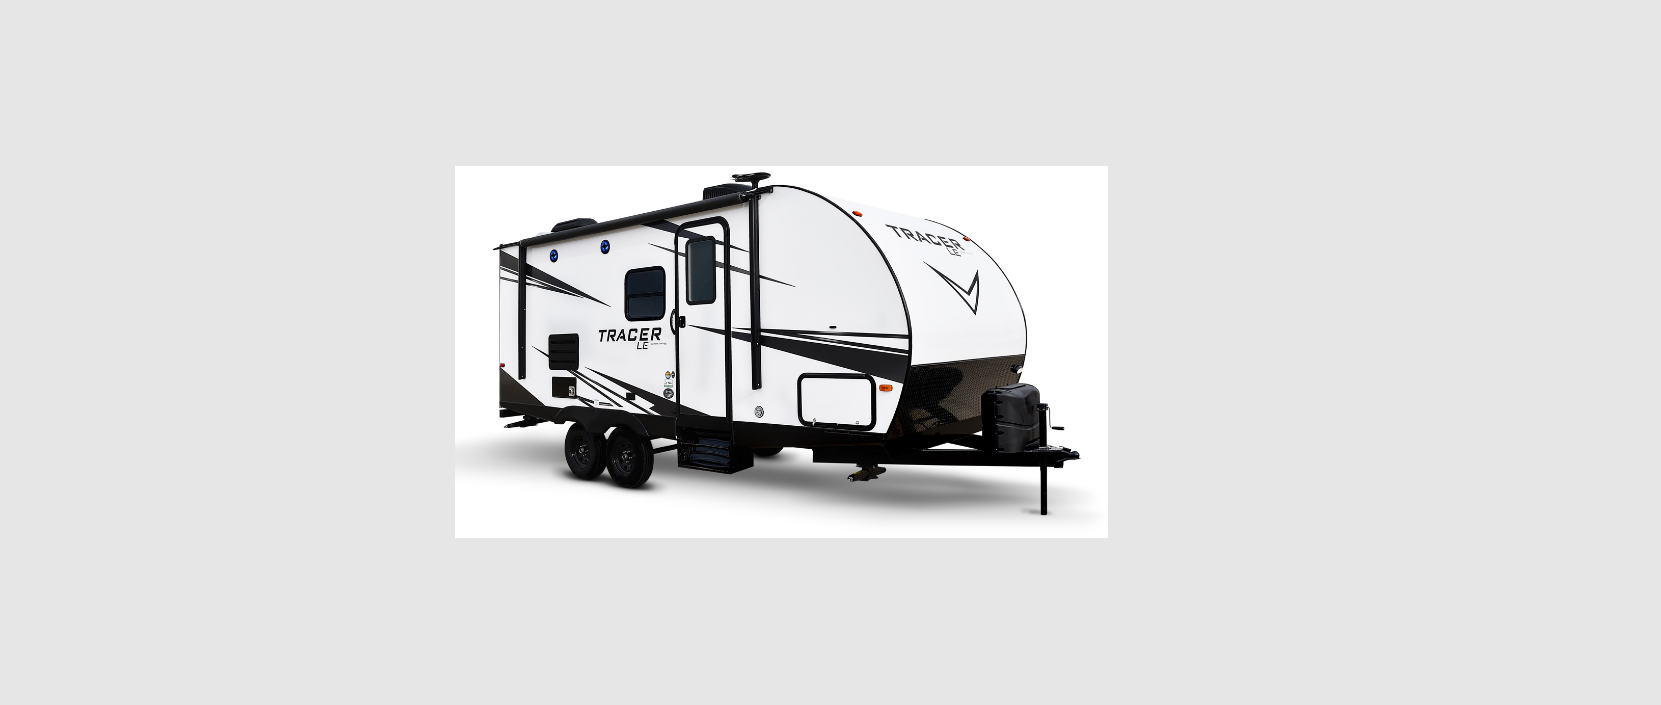 2021 Prime Time RV Tracer Travel Trailers FEATURED